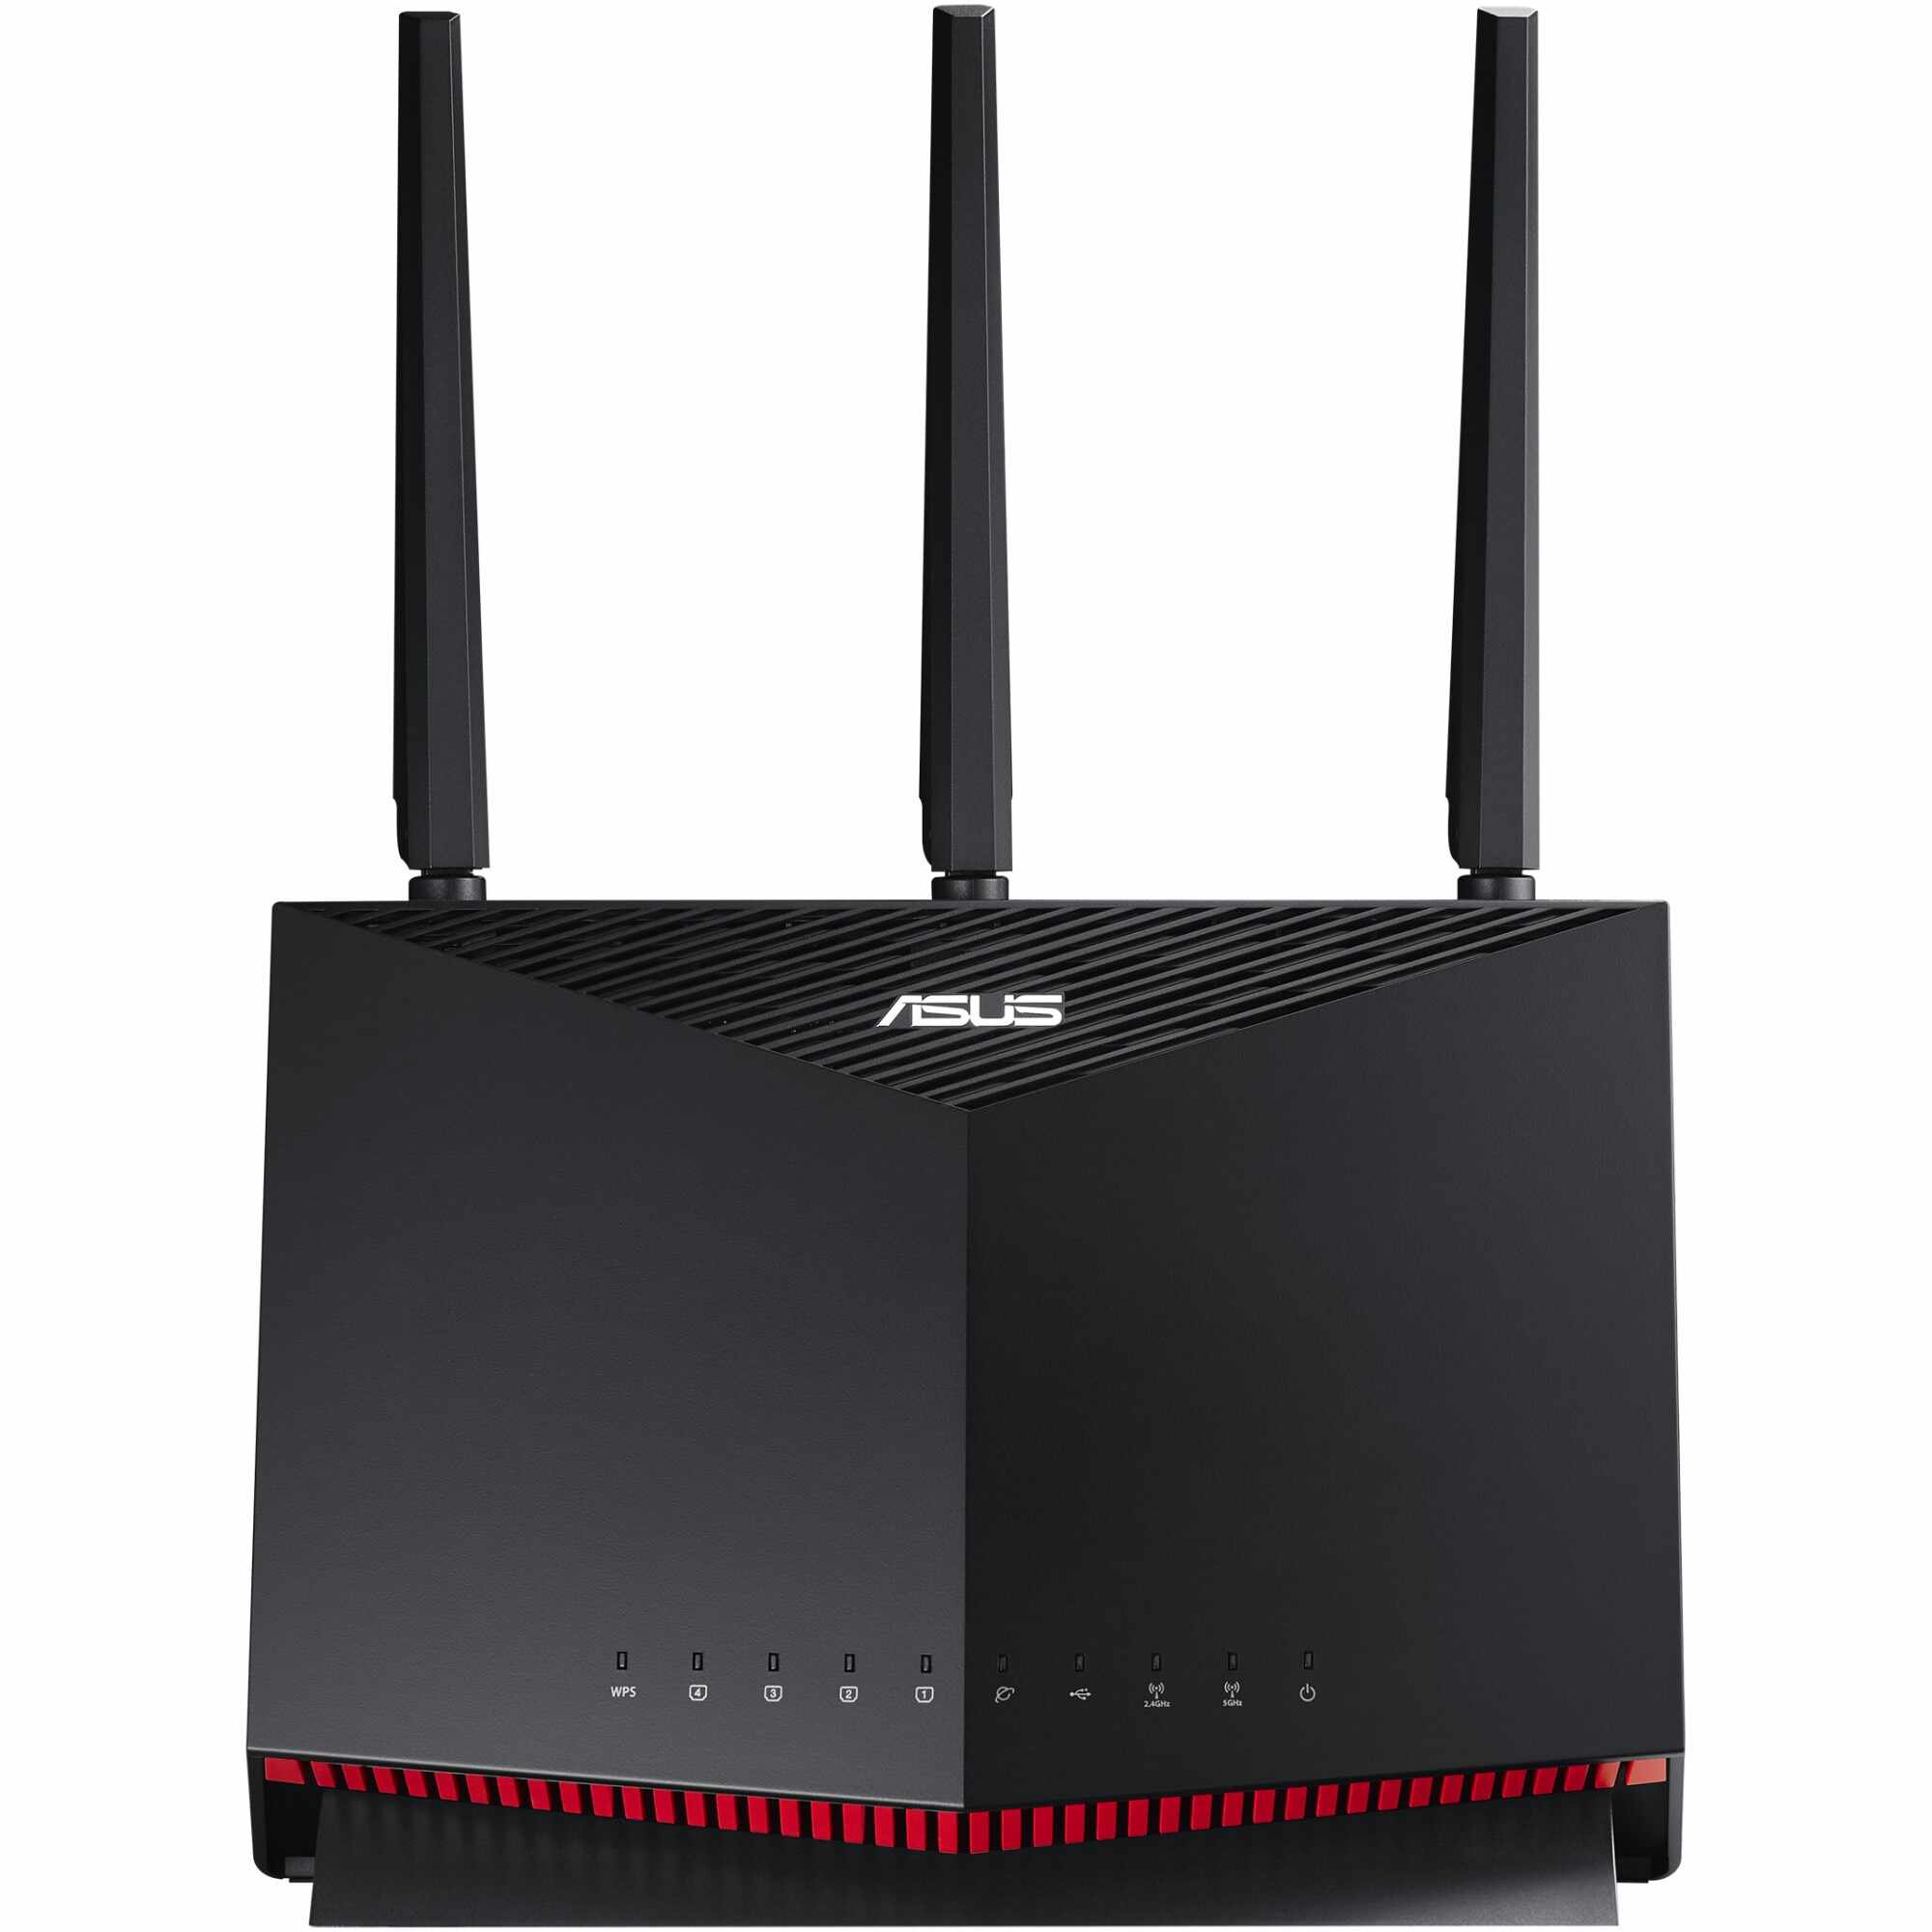 Router Wireless Gaming ASUS RT-AX86S, AX5700, Dual-Band, Wi-Fi 6, AiMesh, AiProtection Pro, Mobile Game Mode, compatibil PS5, 3 antene Wi-Fi